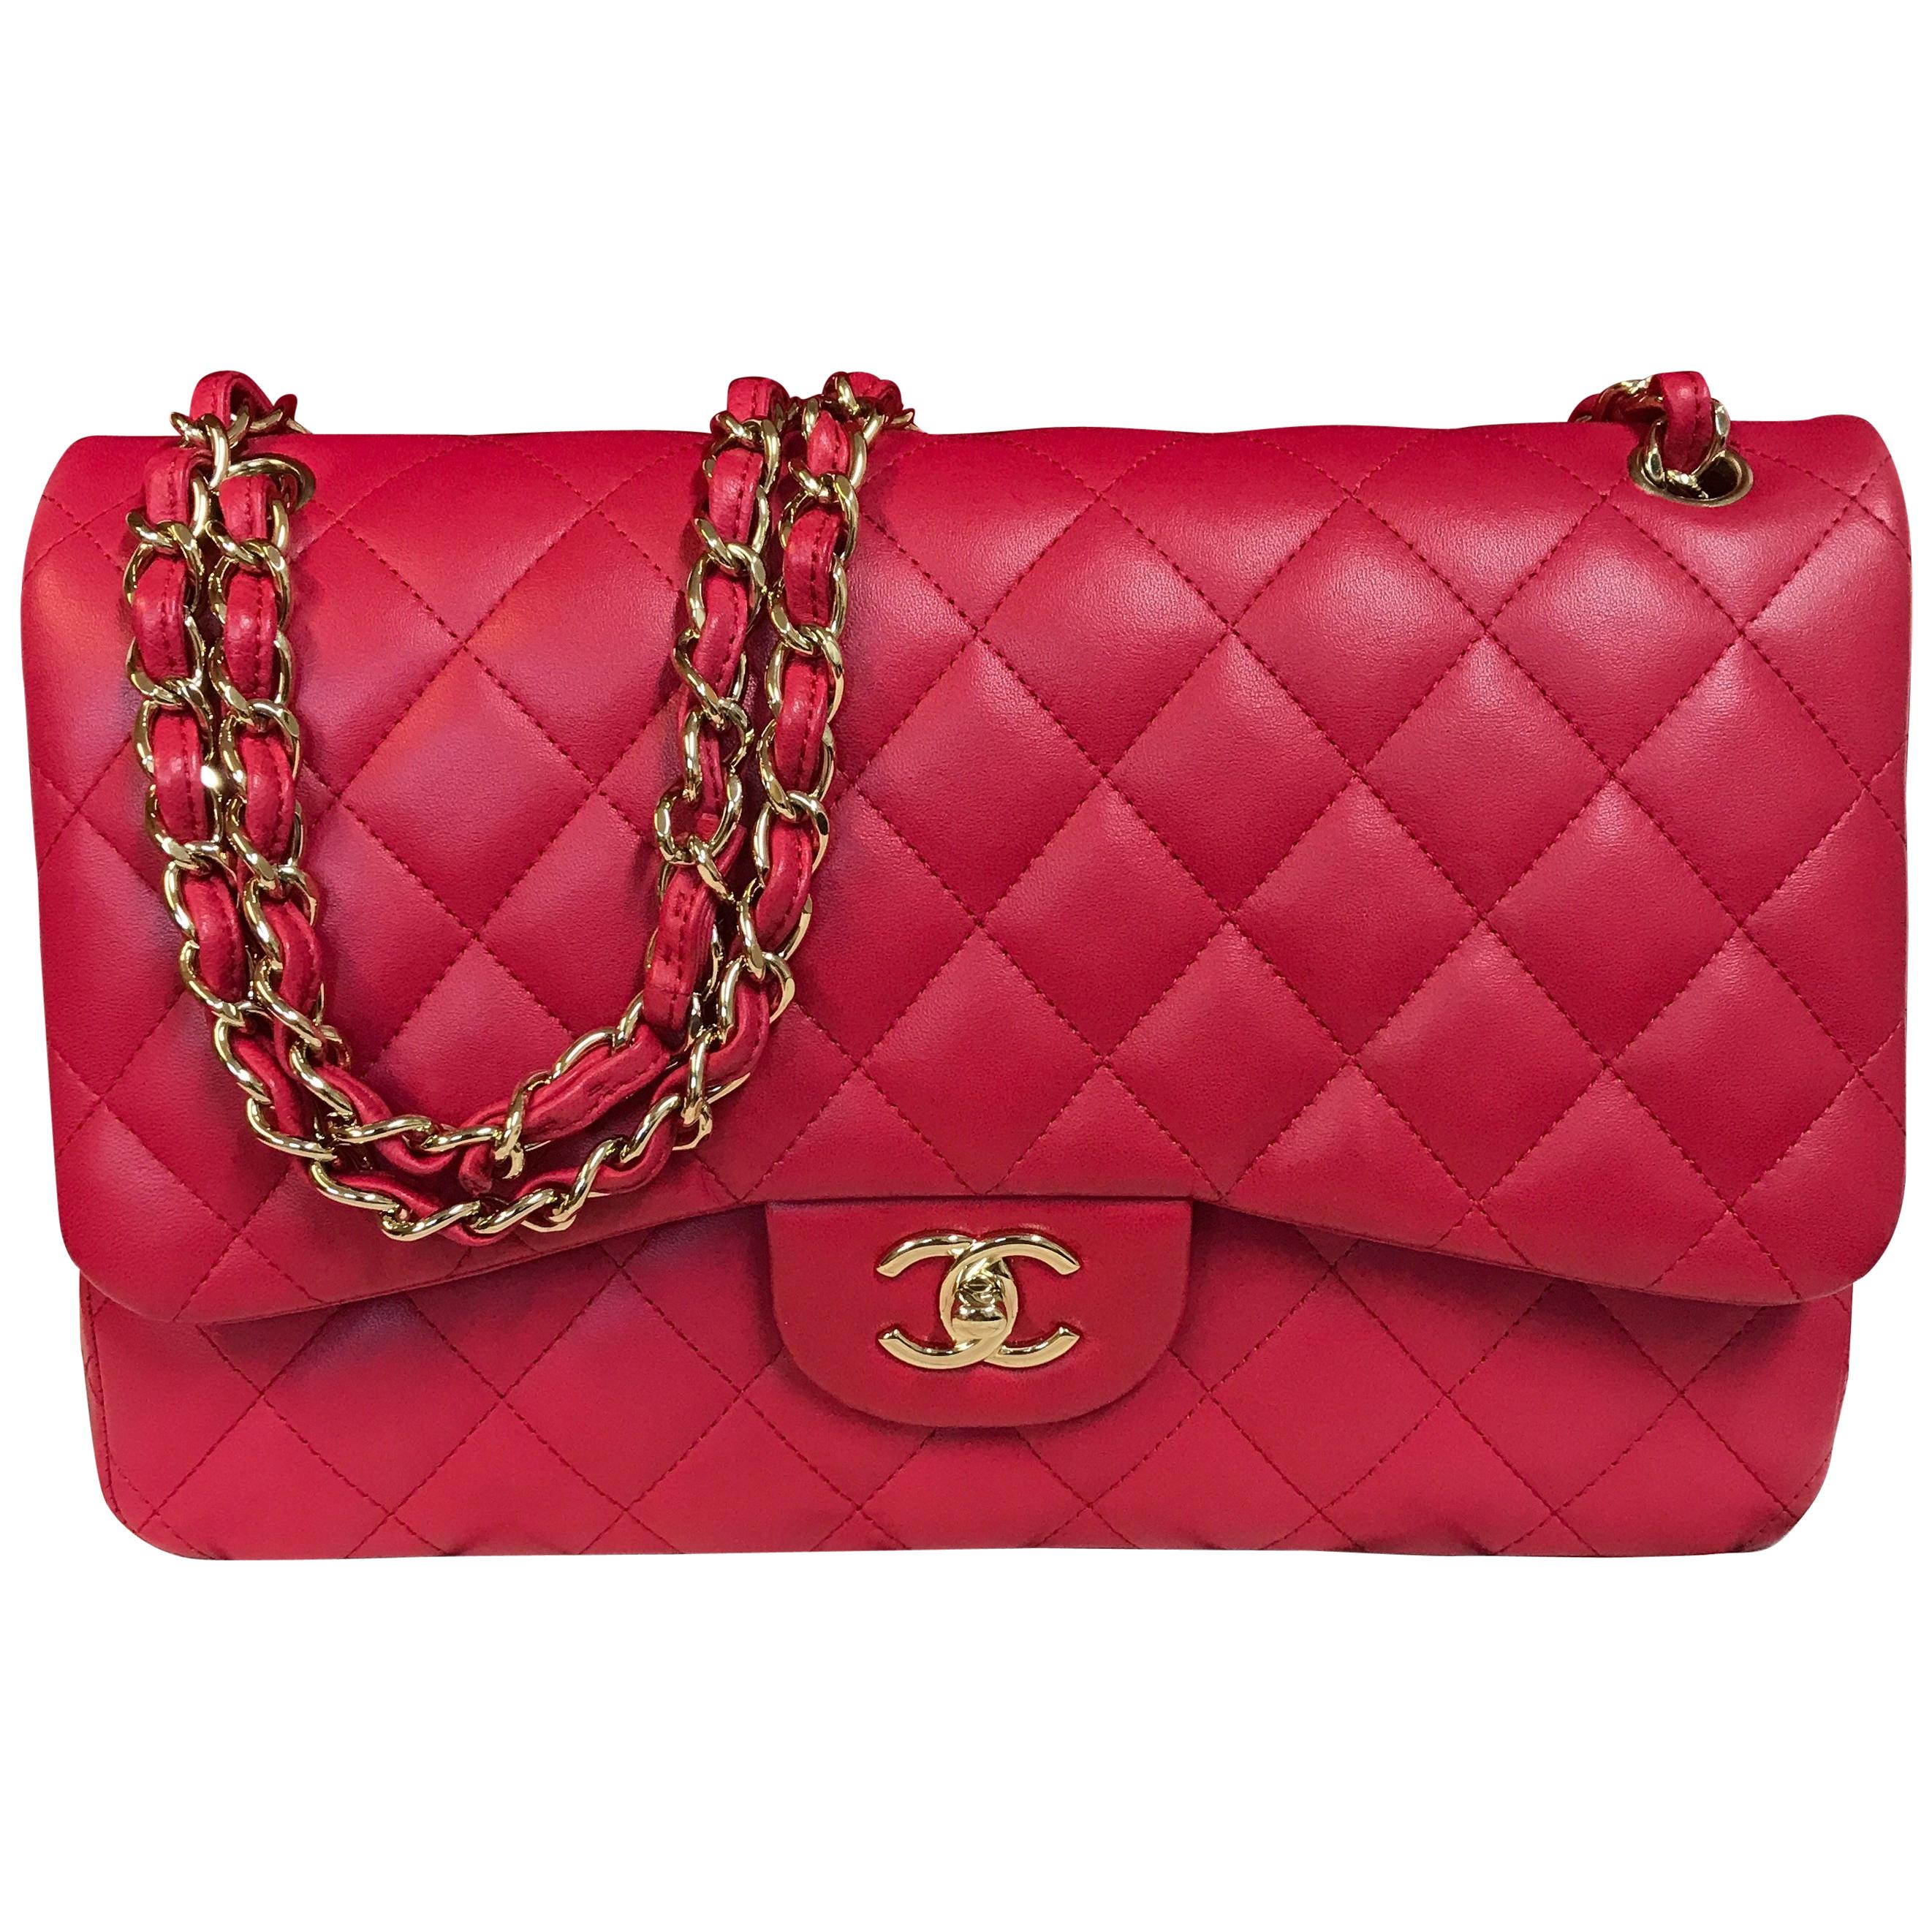 CHANEL double flap bag Jumbo pink shoulder bag quilted lambskin 2016 For Sale